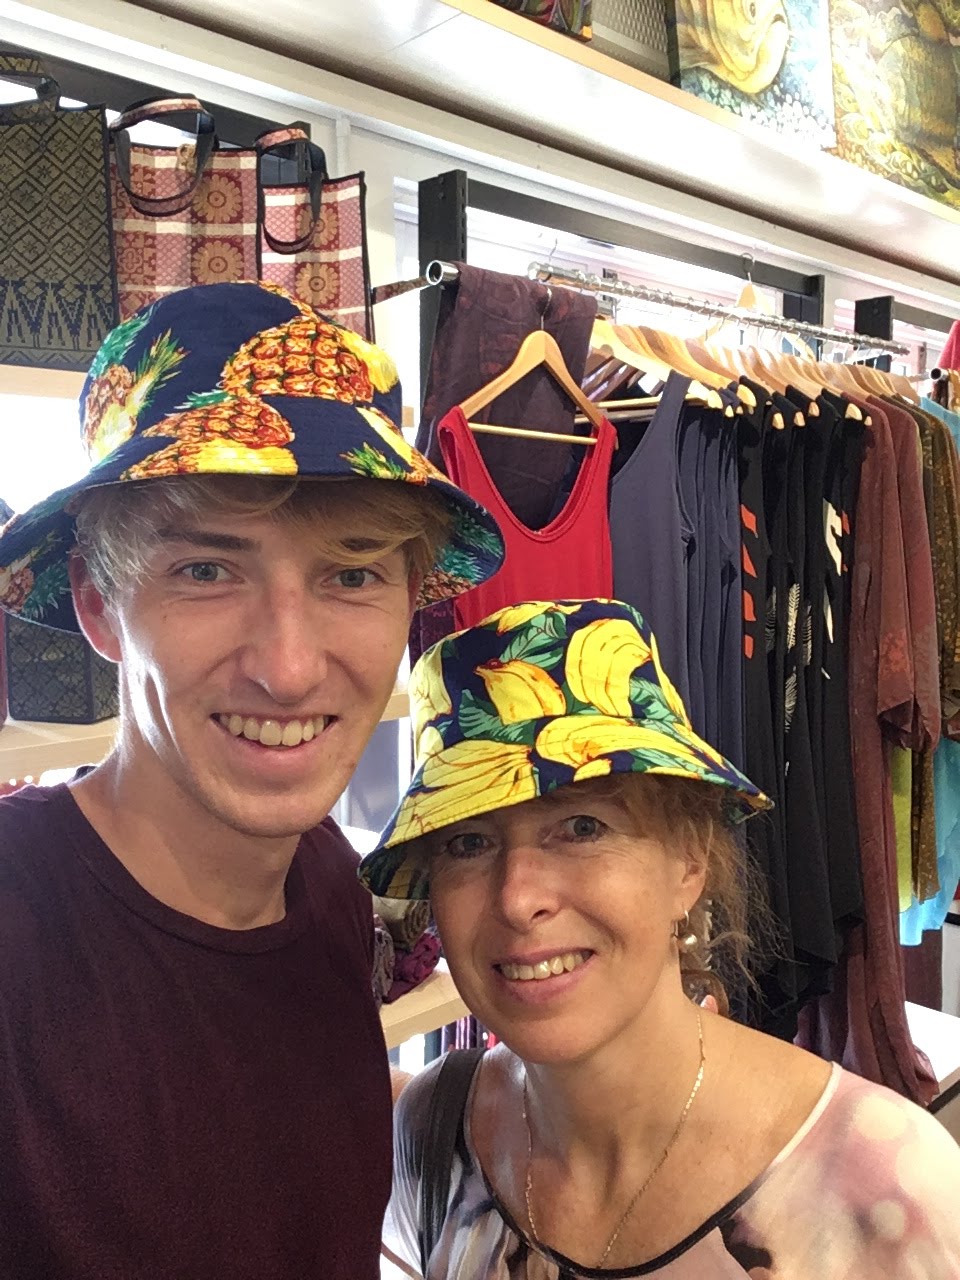 Wearing fruit hats together with my mom